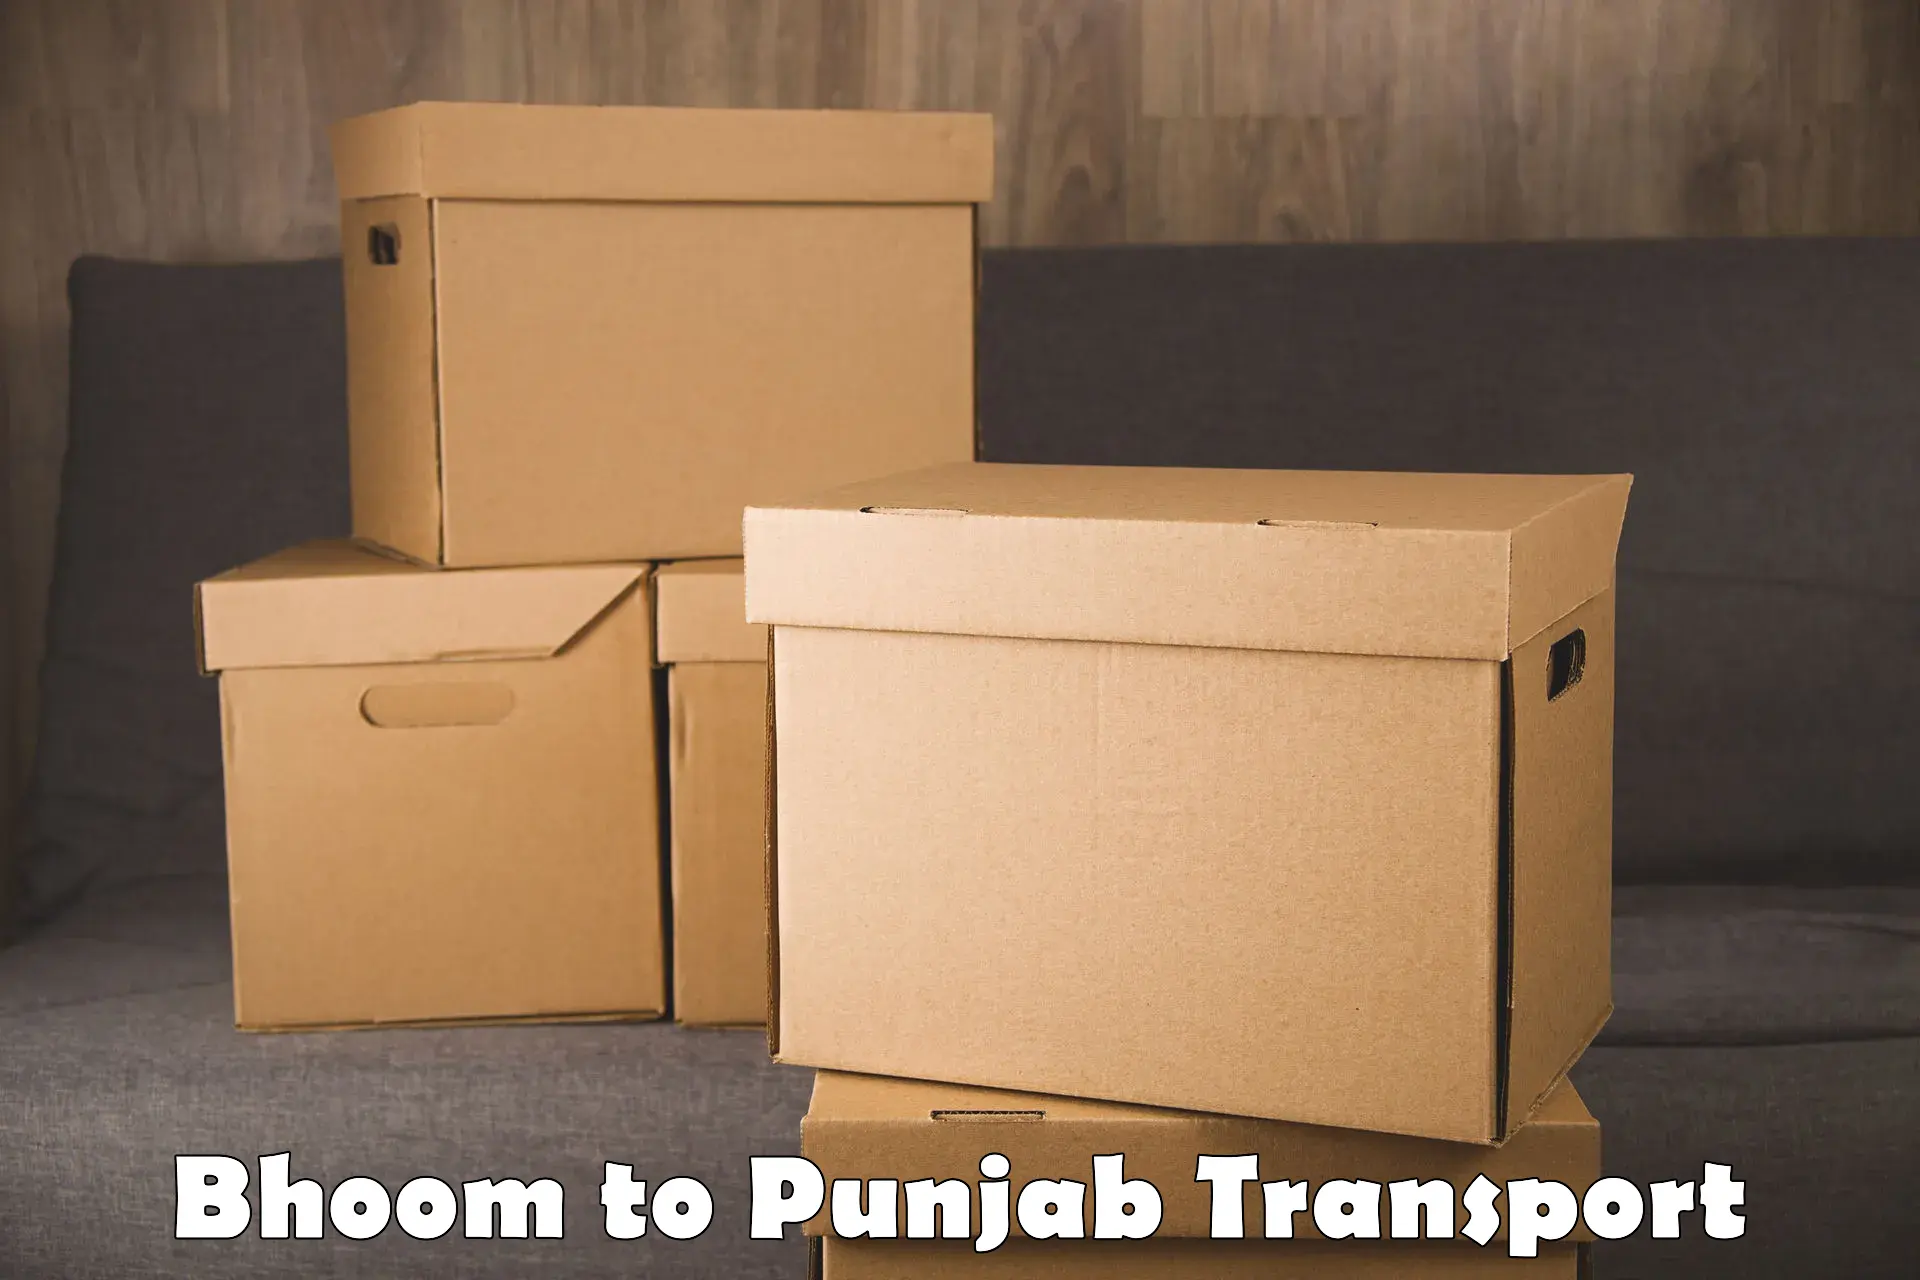 Nationwide transport services Bhoom to Punjab